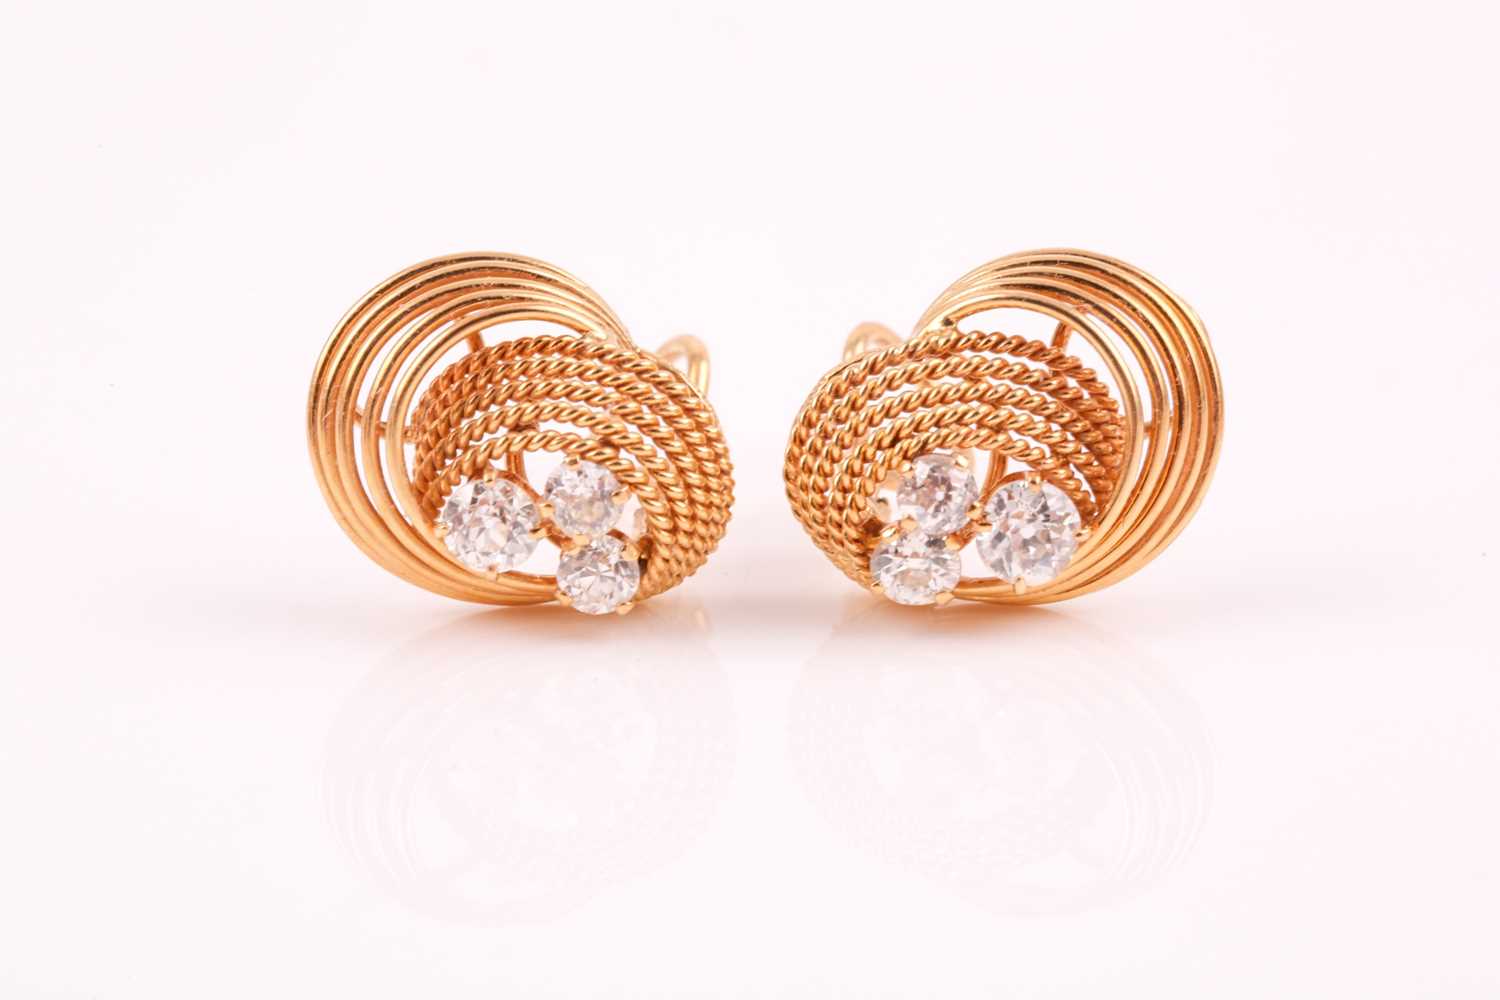 A pair of 18ct yellow gold and diamond earrings, each with a swirled rope-twist mount set with three - Image 2 of 6